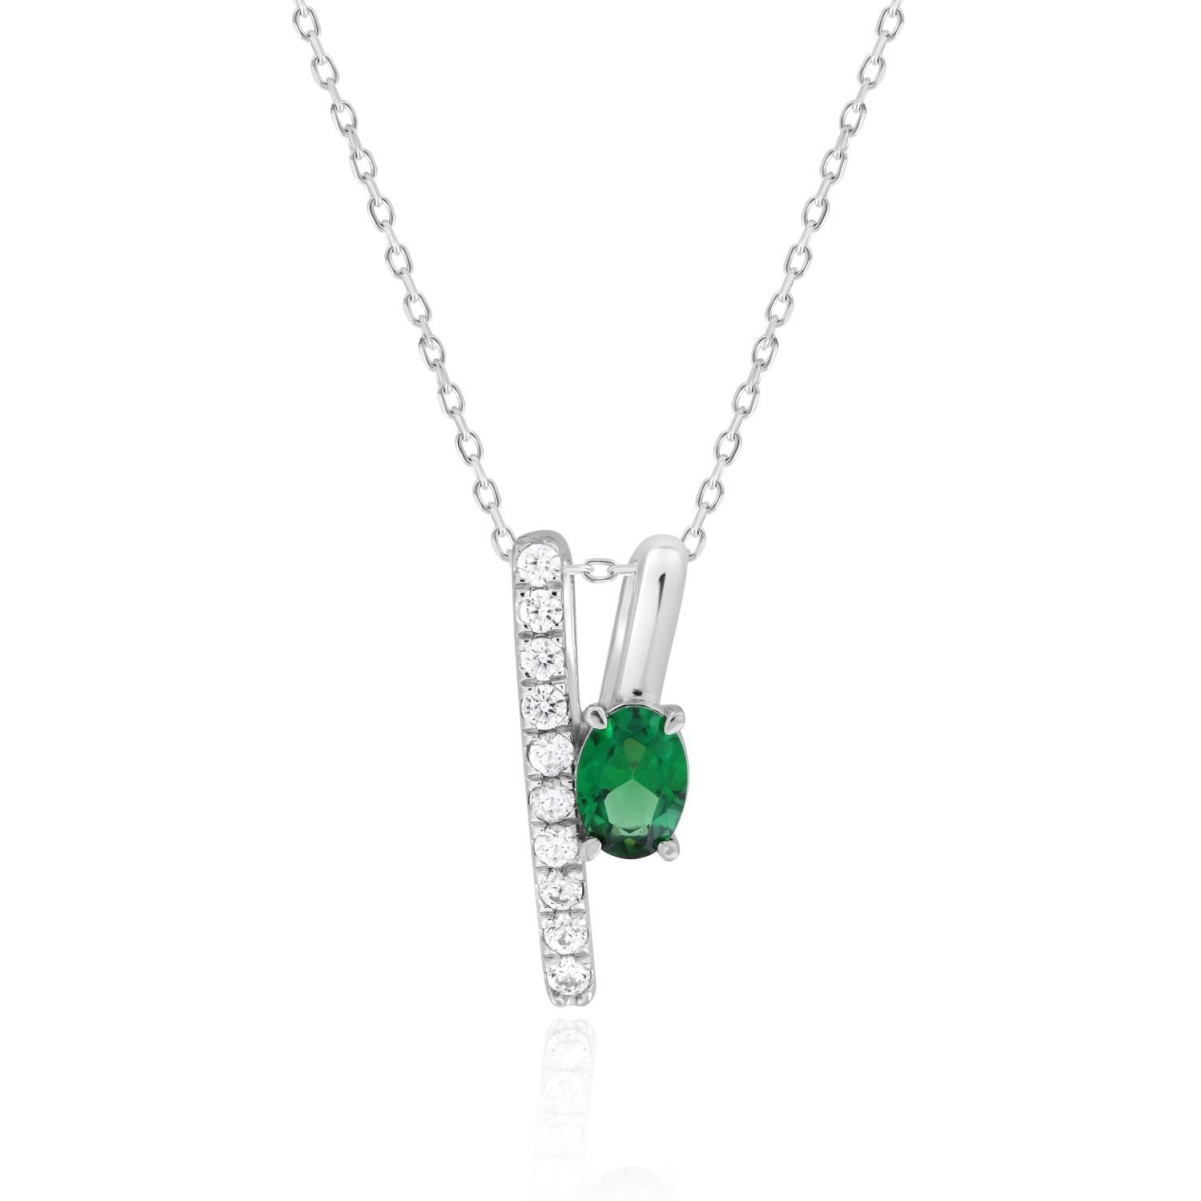 14K WHITE GOLD 1 1/5CT ROUND/OVAL DIAMOND LADIES PENDANT WITH CHAIN(COLOR STONE OVAL GREEN EMERALD DIAMOND 7/8CT)